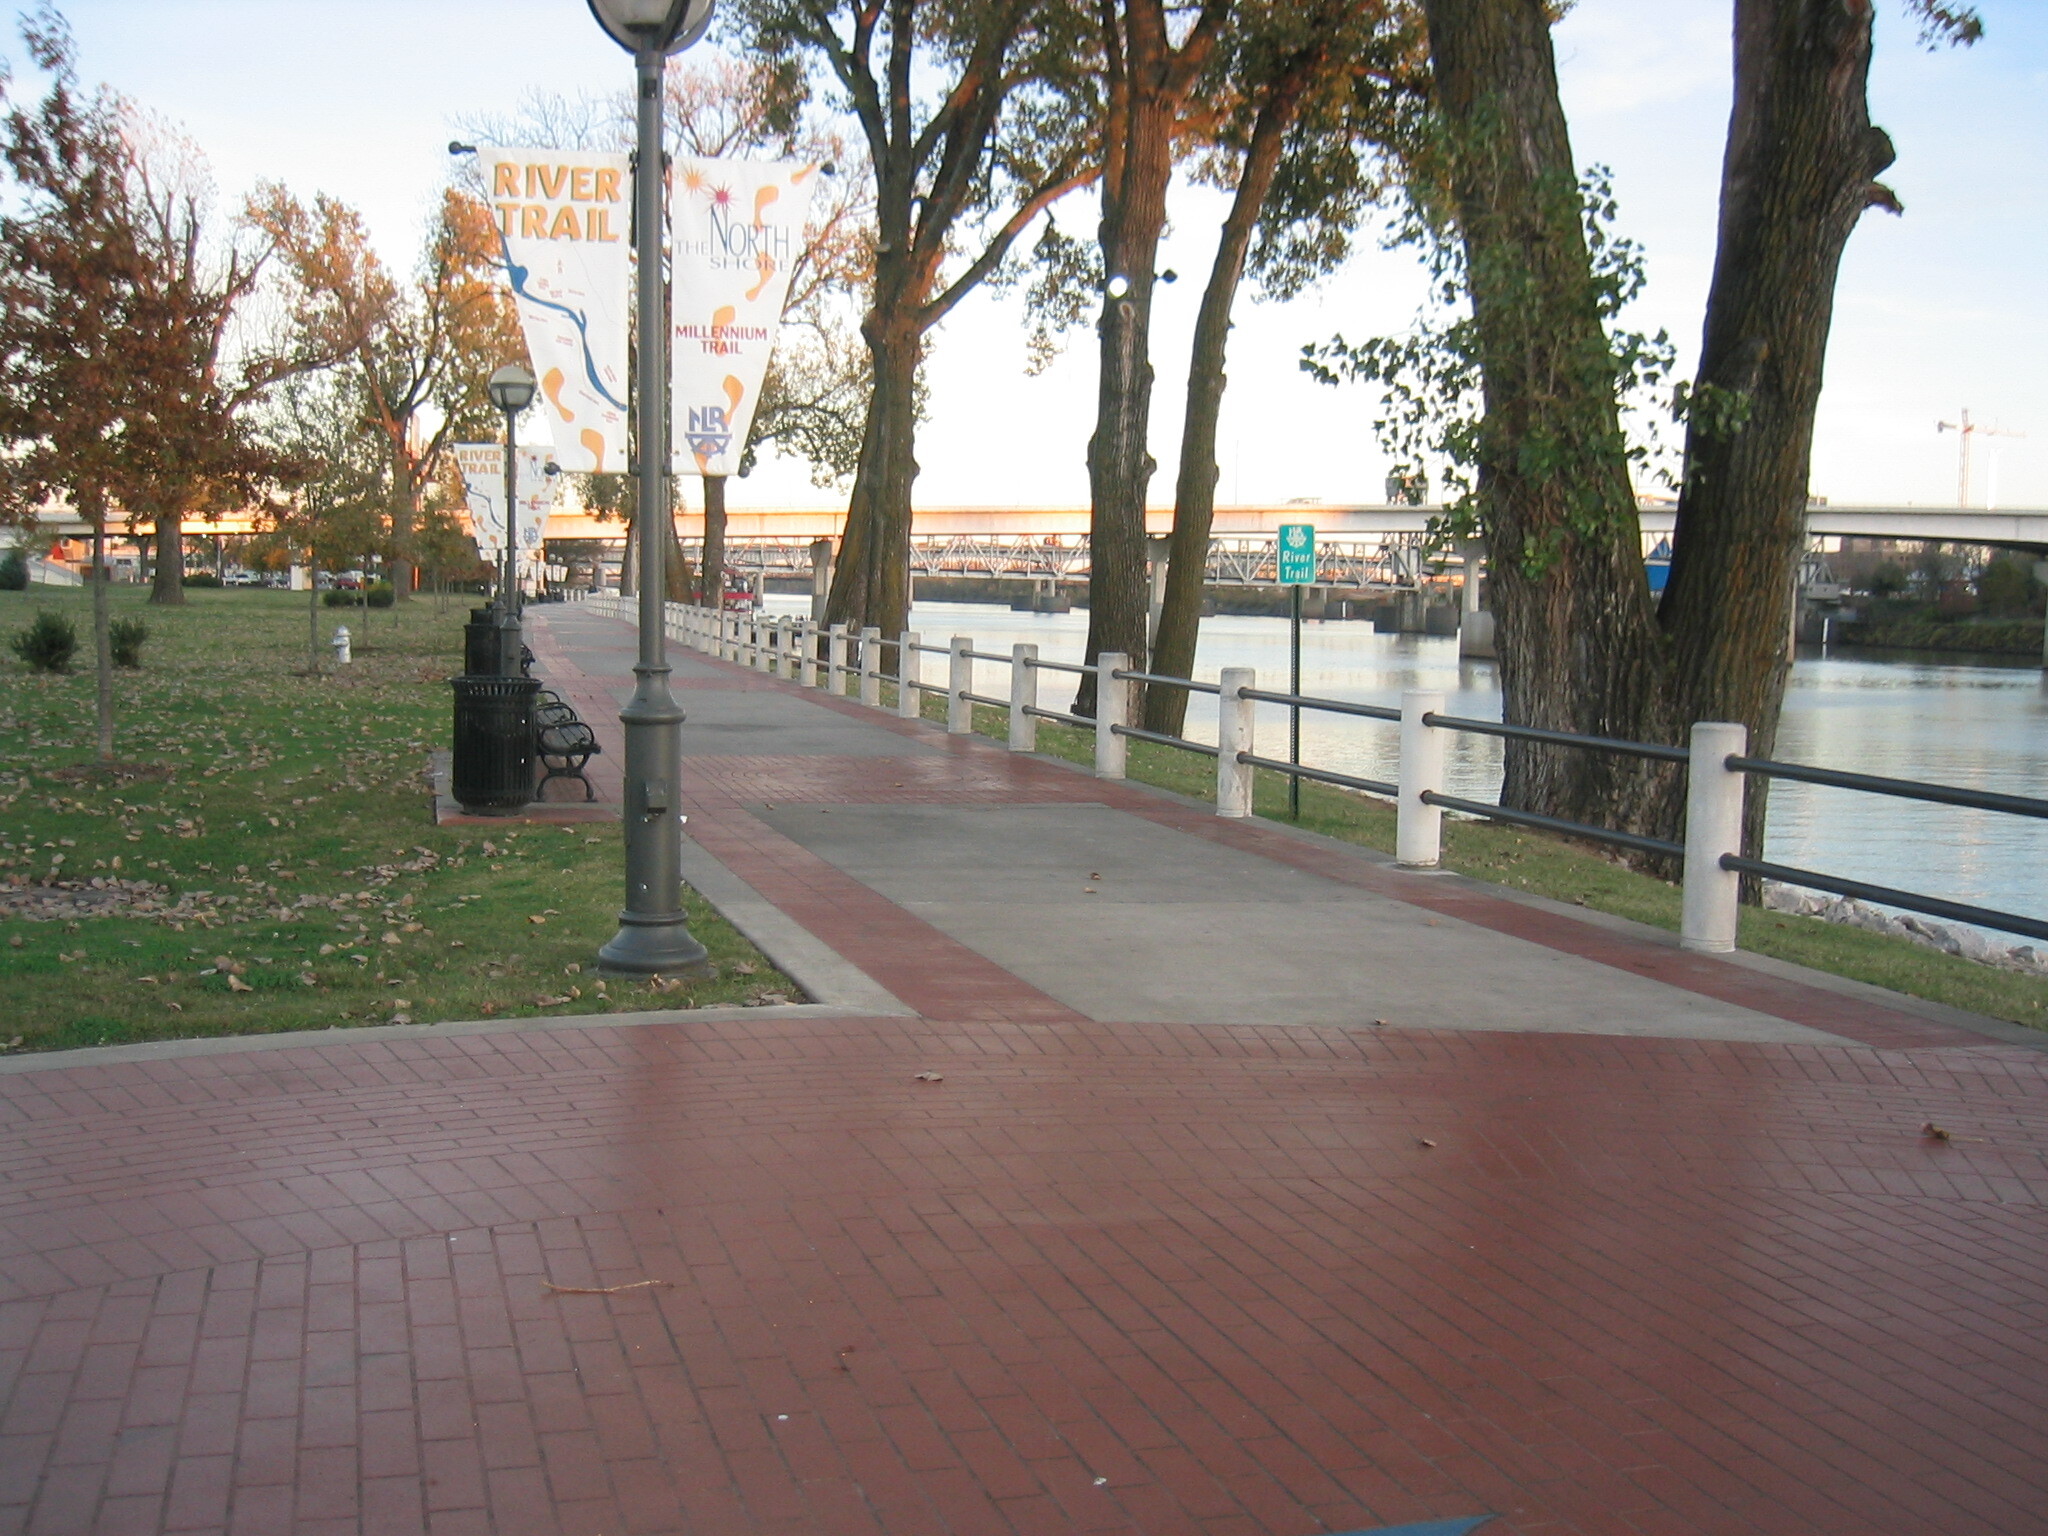 A tree-lined recreational trail along the Arkansas River in North Little Rock, Arkansas